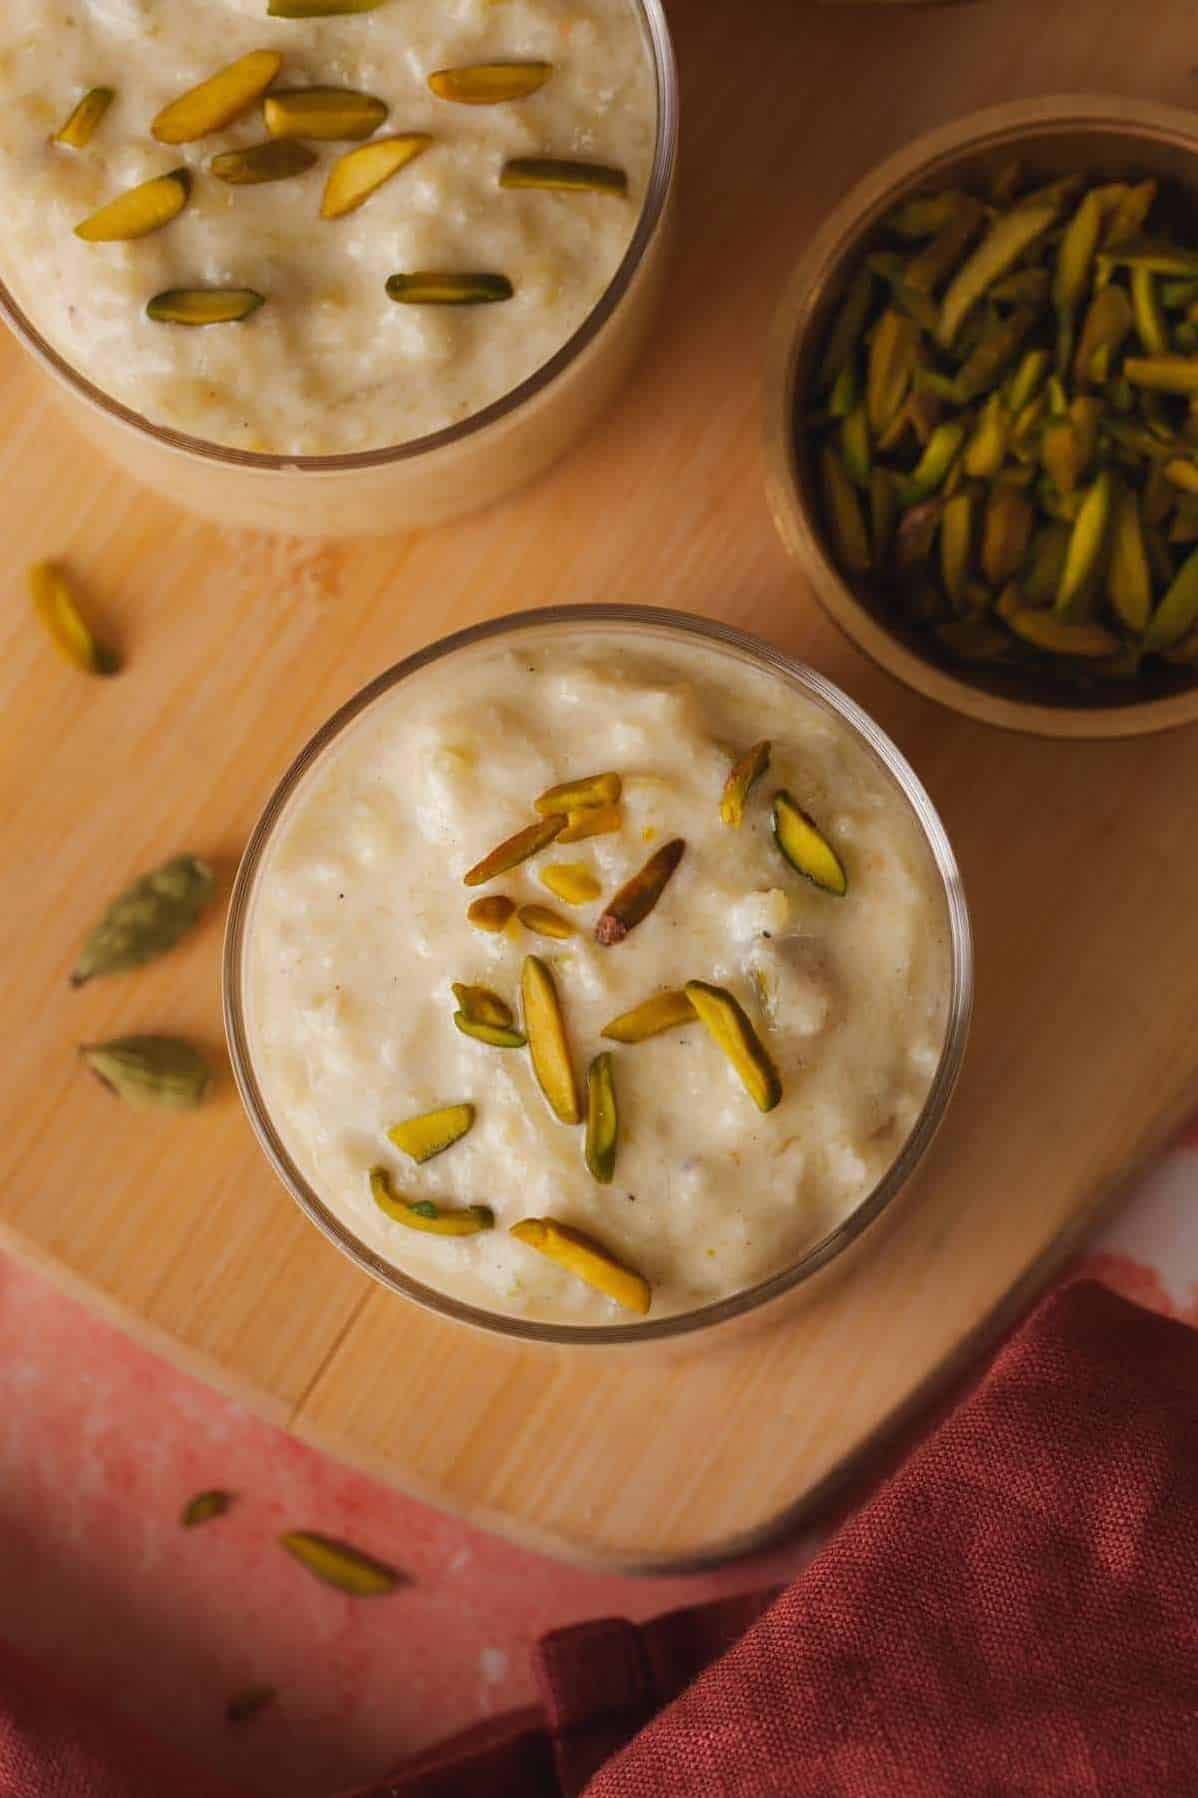  A golden-hued pudding made with the goodness of bottle gourd.